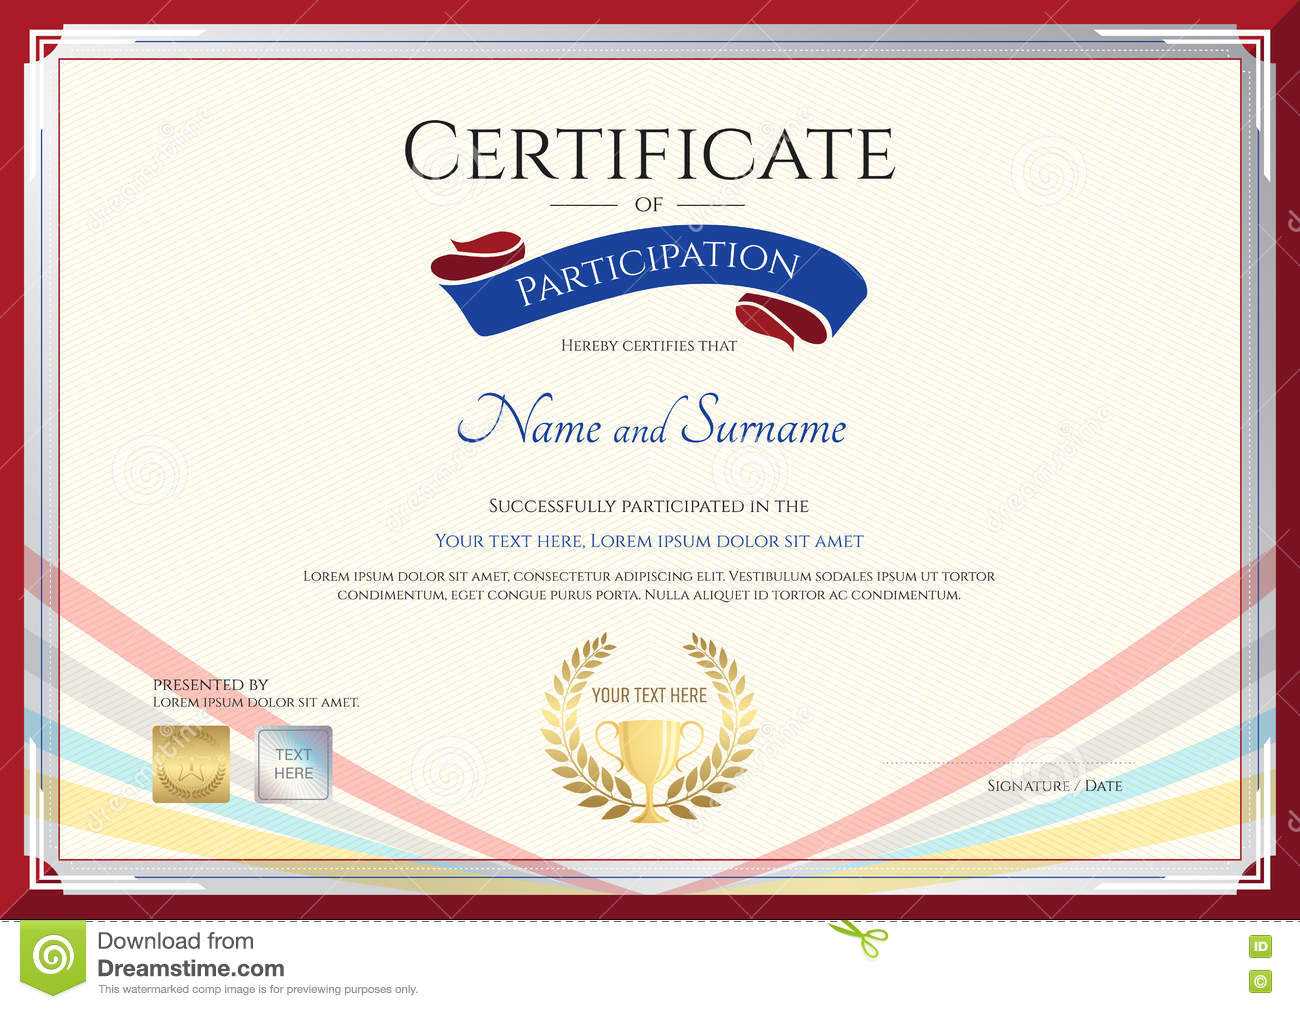 Certificate Template For Achievement, Appreciation Or Pertaining To Sample Certificate Of Participation Template